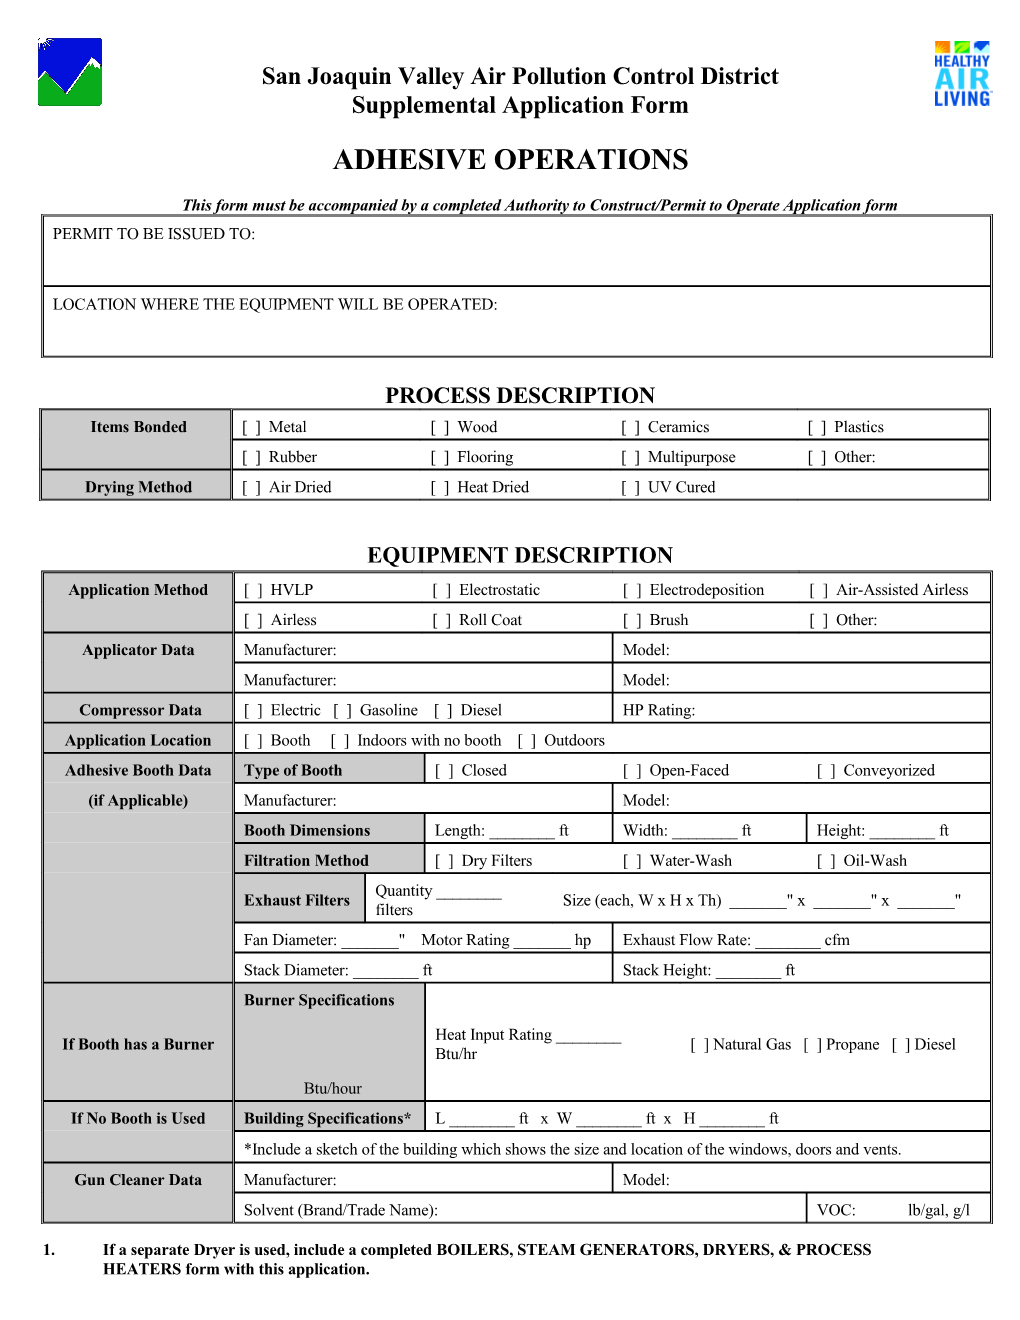 Adhesive Operation Supplemental Application Form